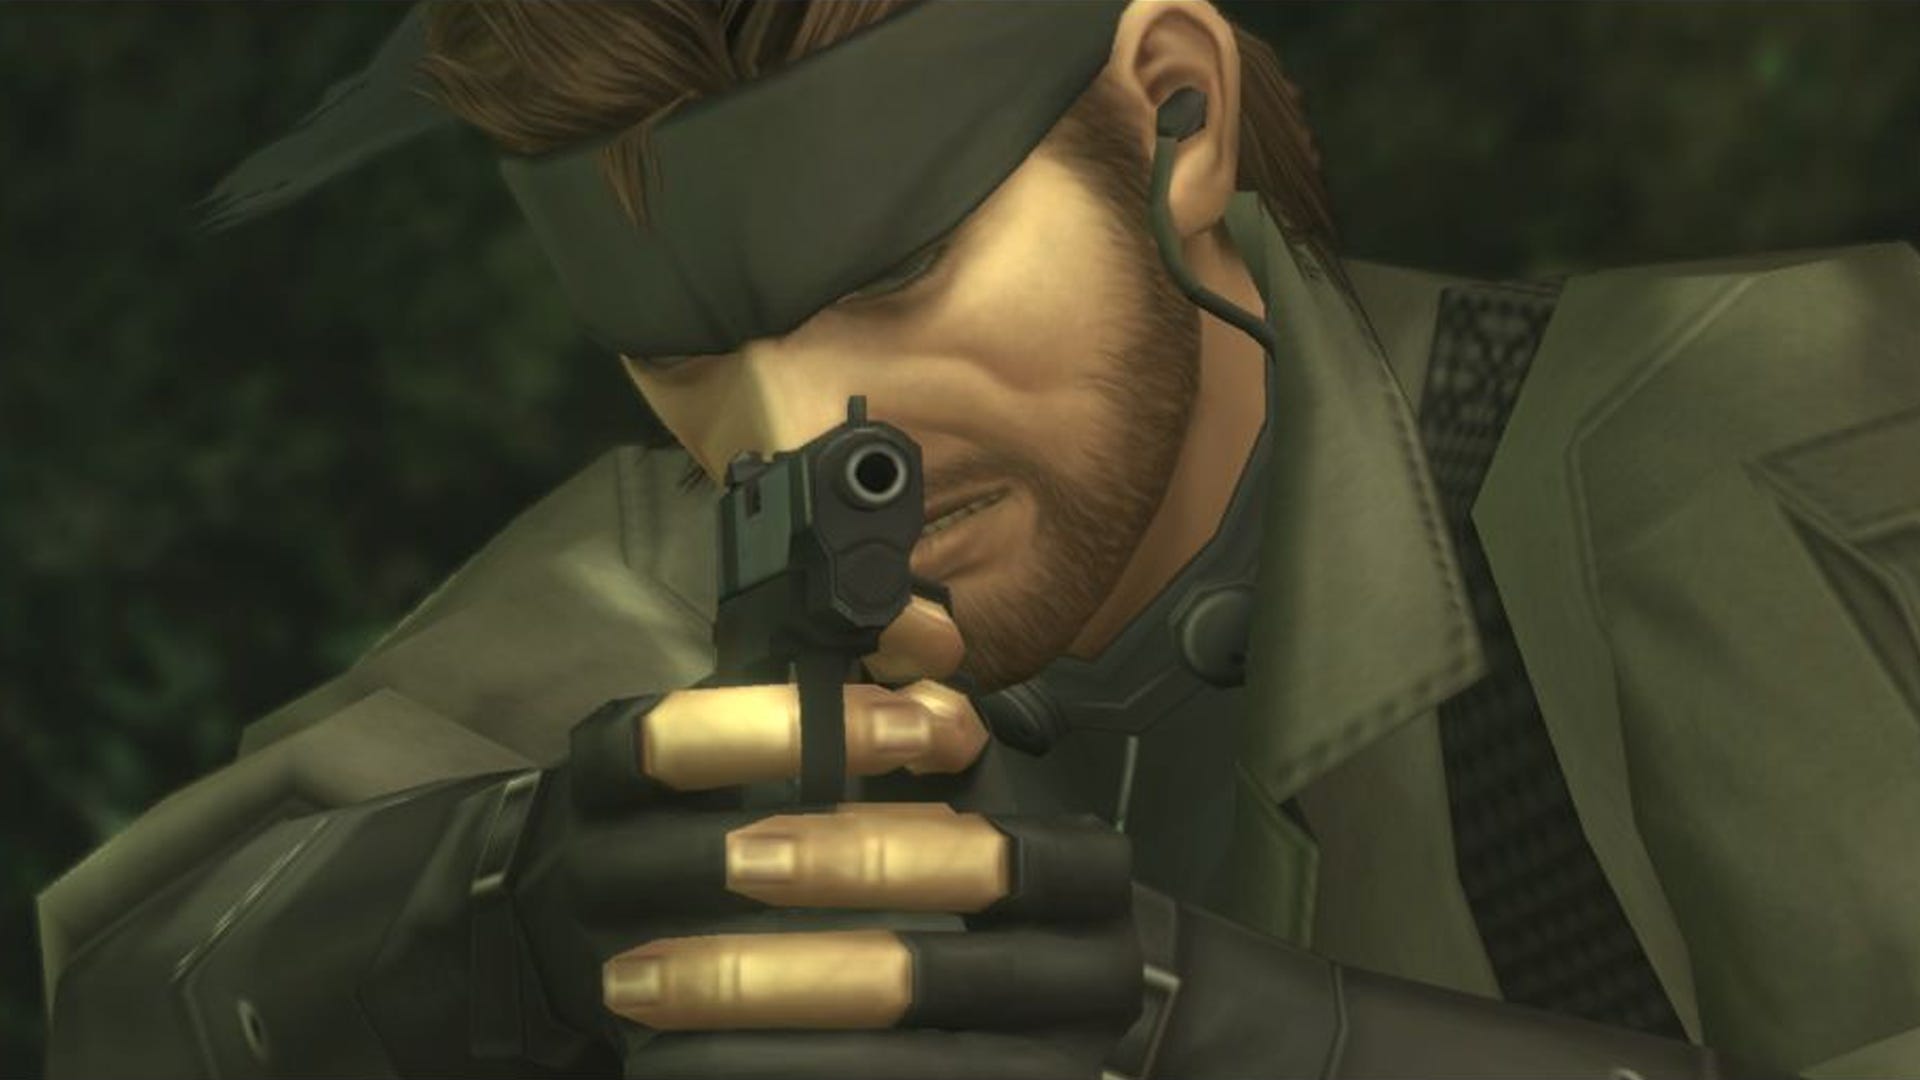 metal-gear-solid-–-master-collection-vol-1-is-out,-bringing-mgs3-to-pc-for-the-first-time